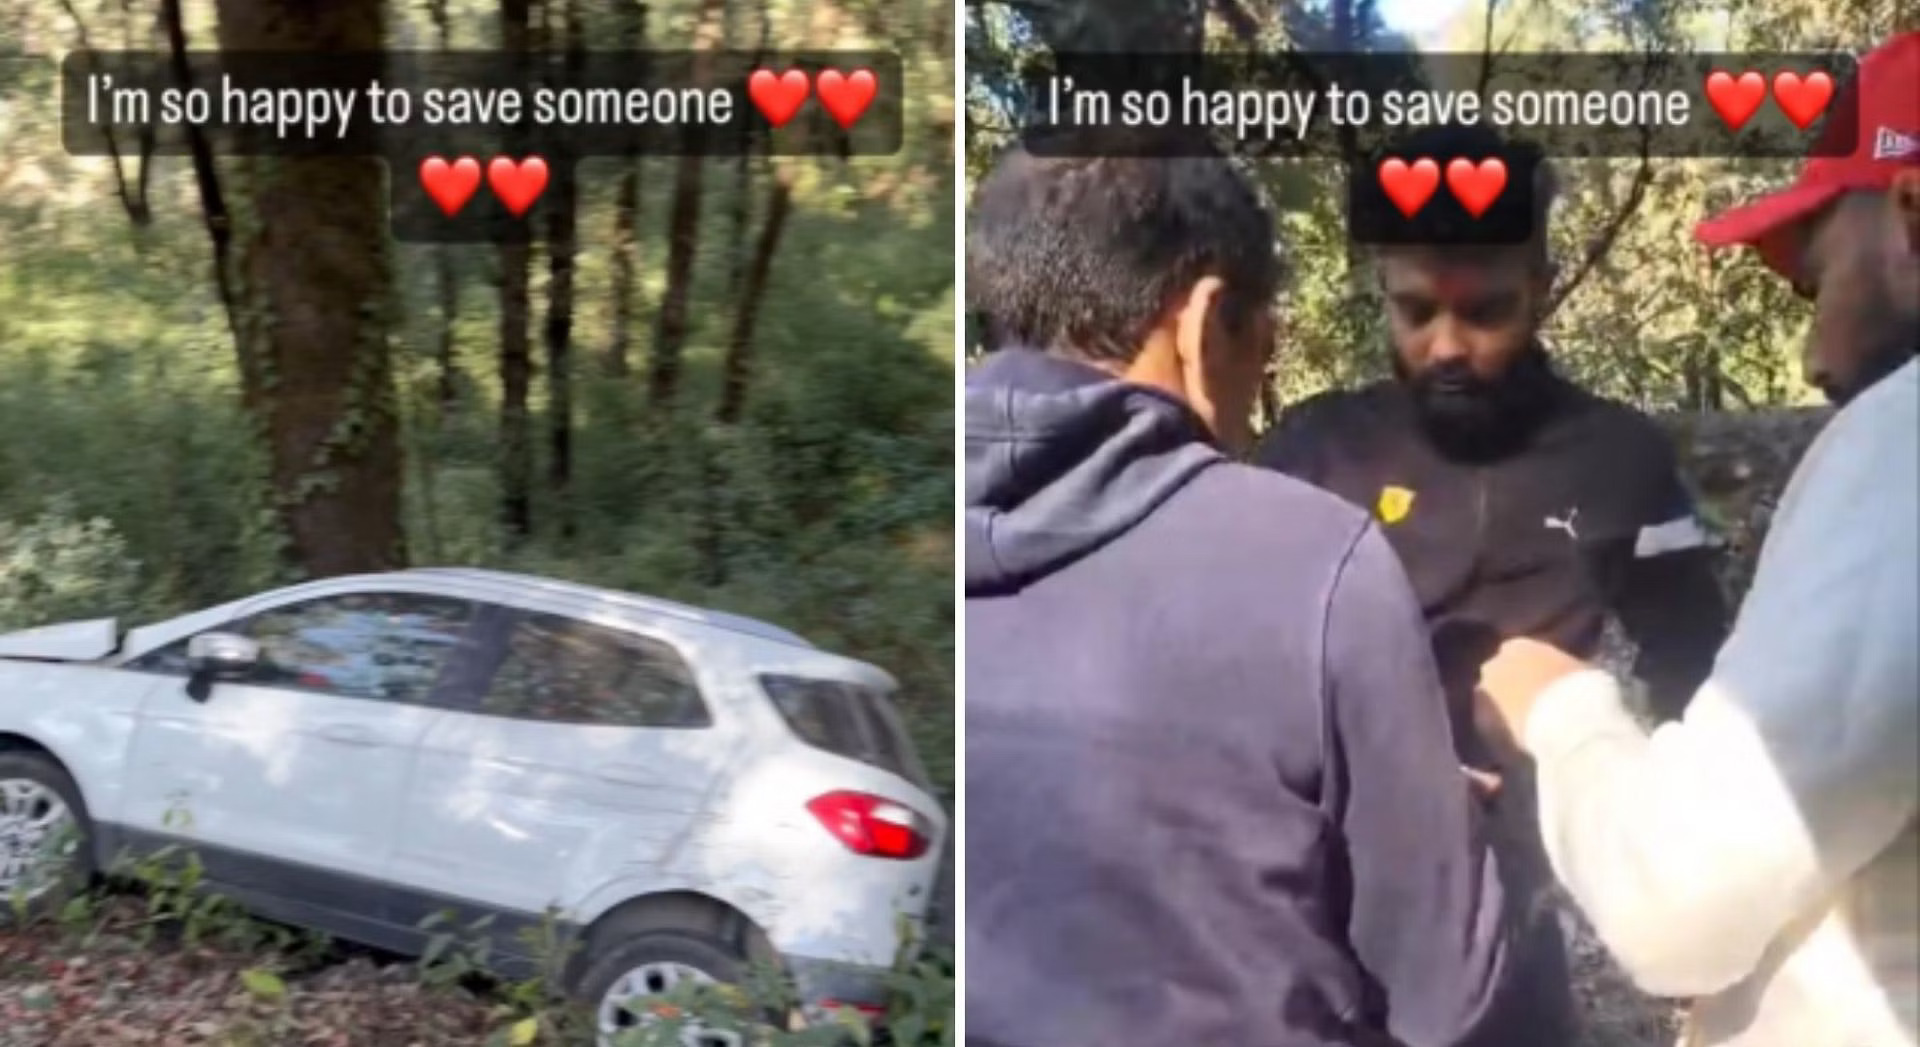 “He’s so lucky god gave him 2nd life” – World Cup hero Mohammed Shami turns savior after witnessing live car accident